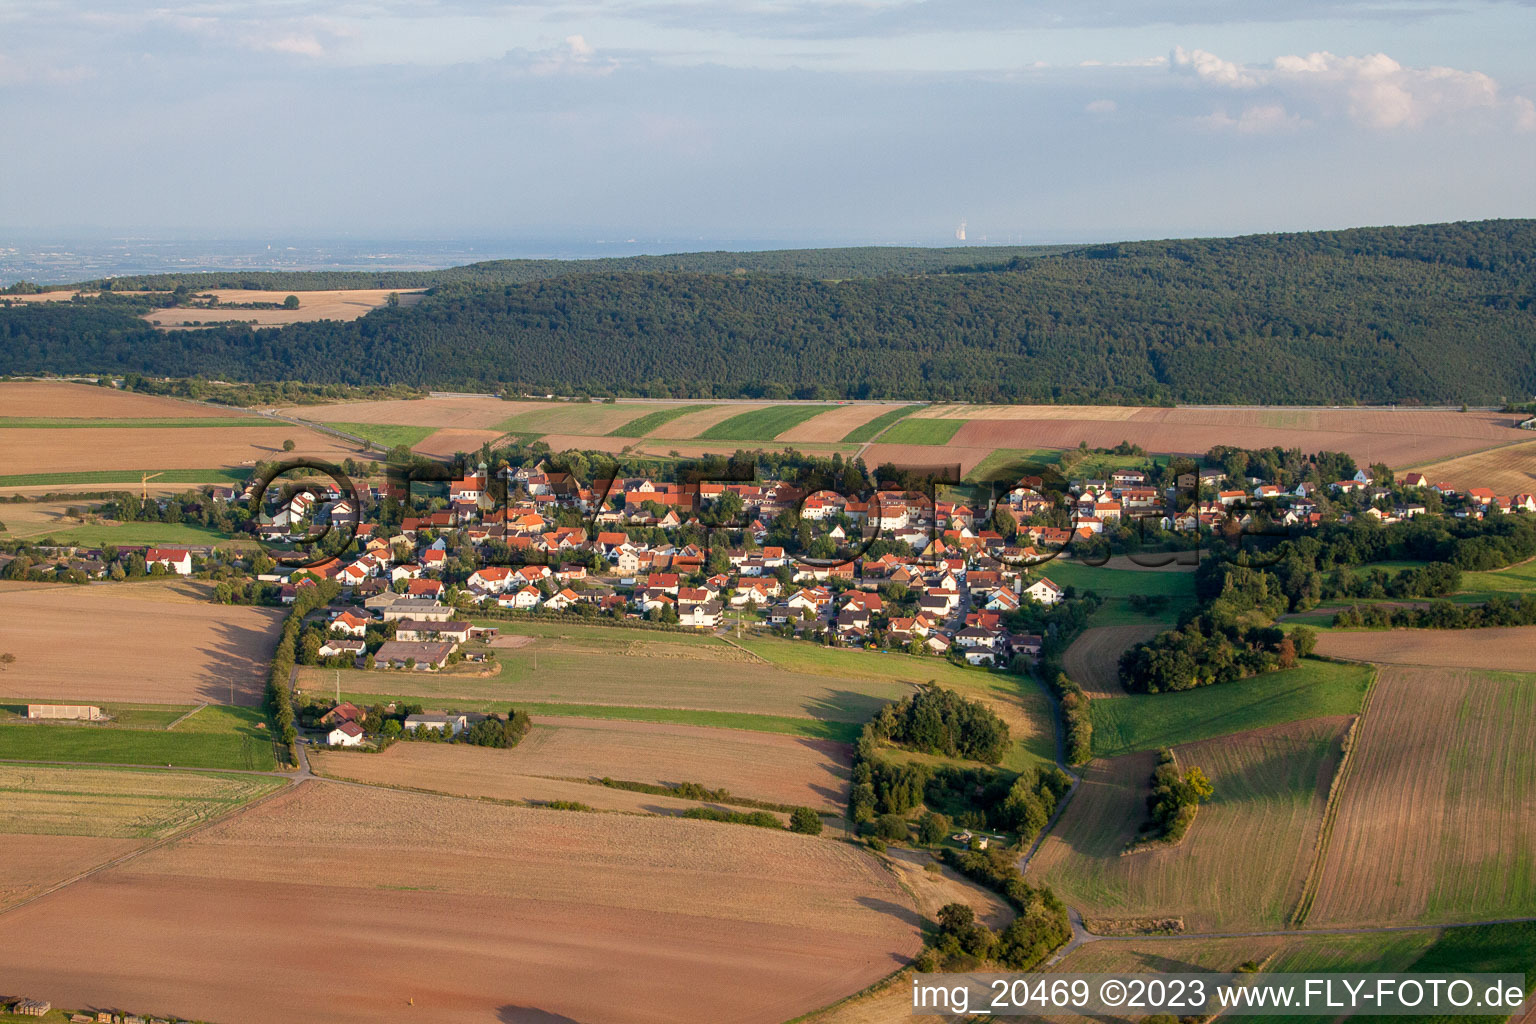 Tiefenthal in the state Rhineland-Palatinate, Germany from a drone